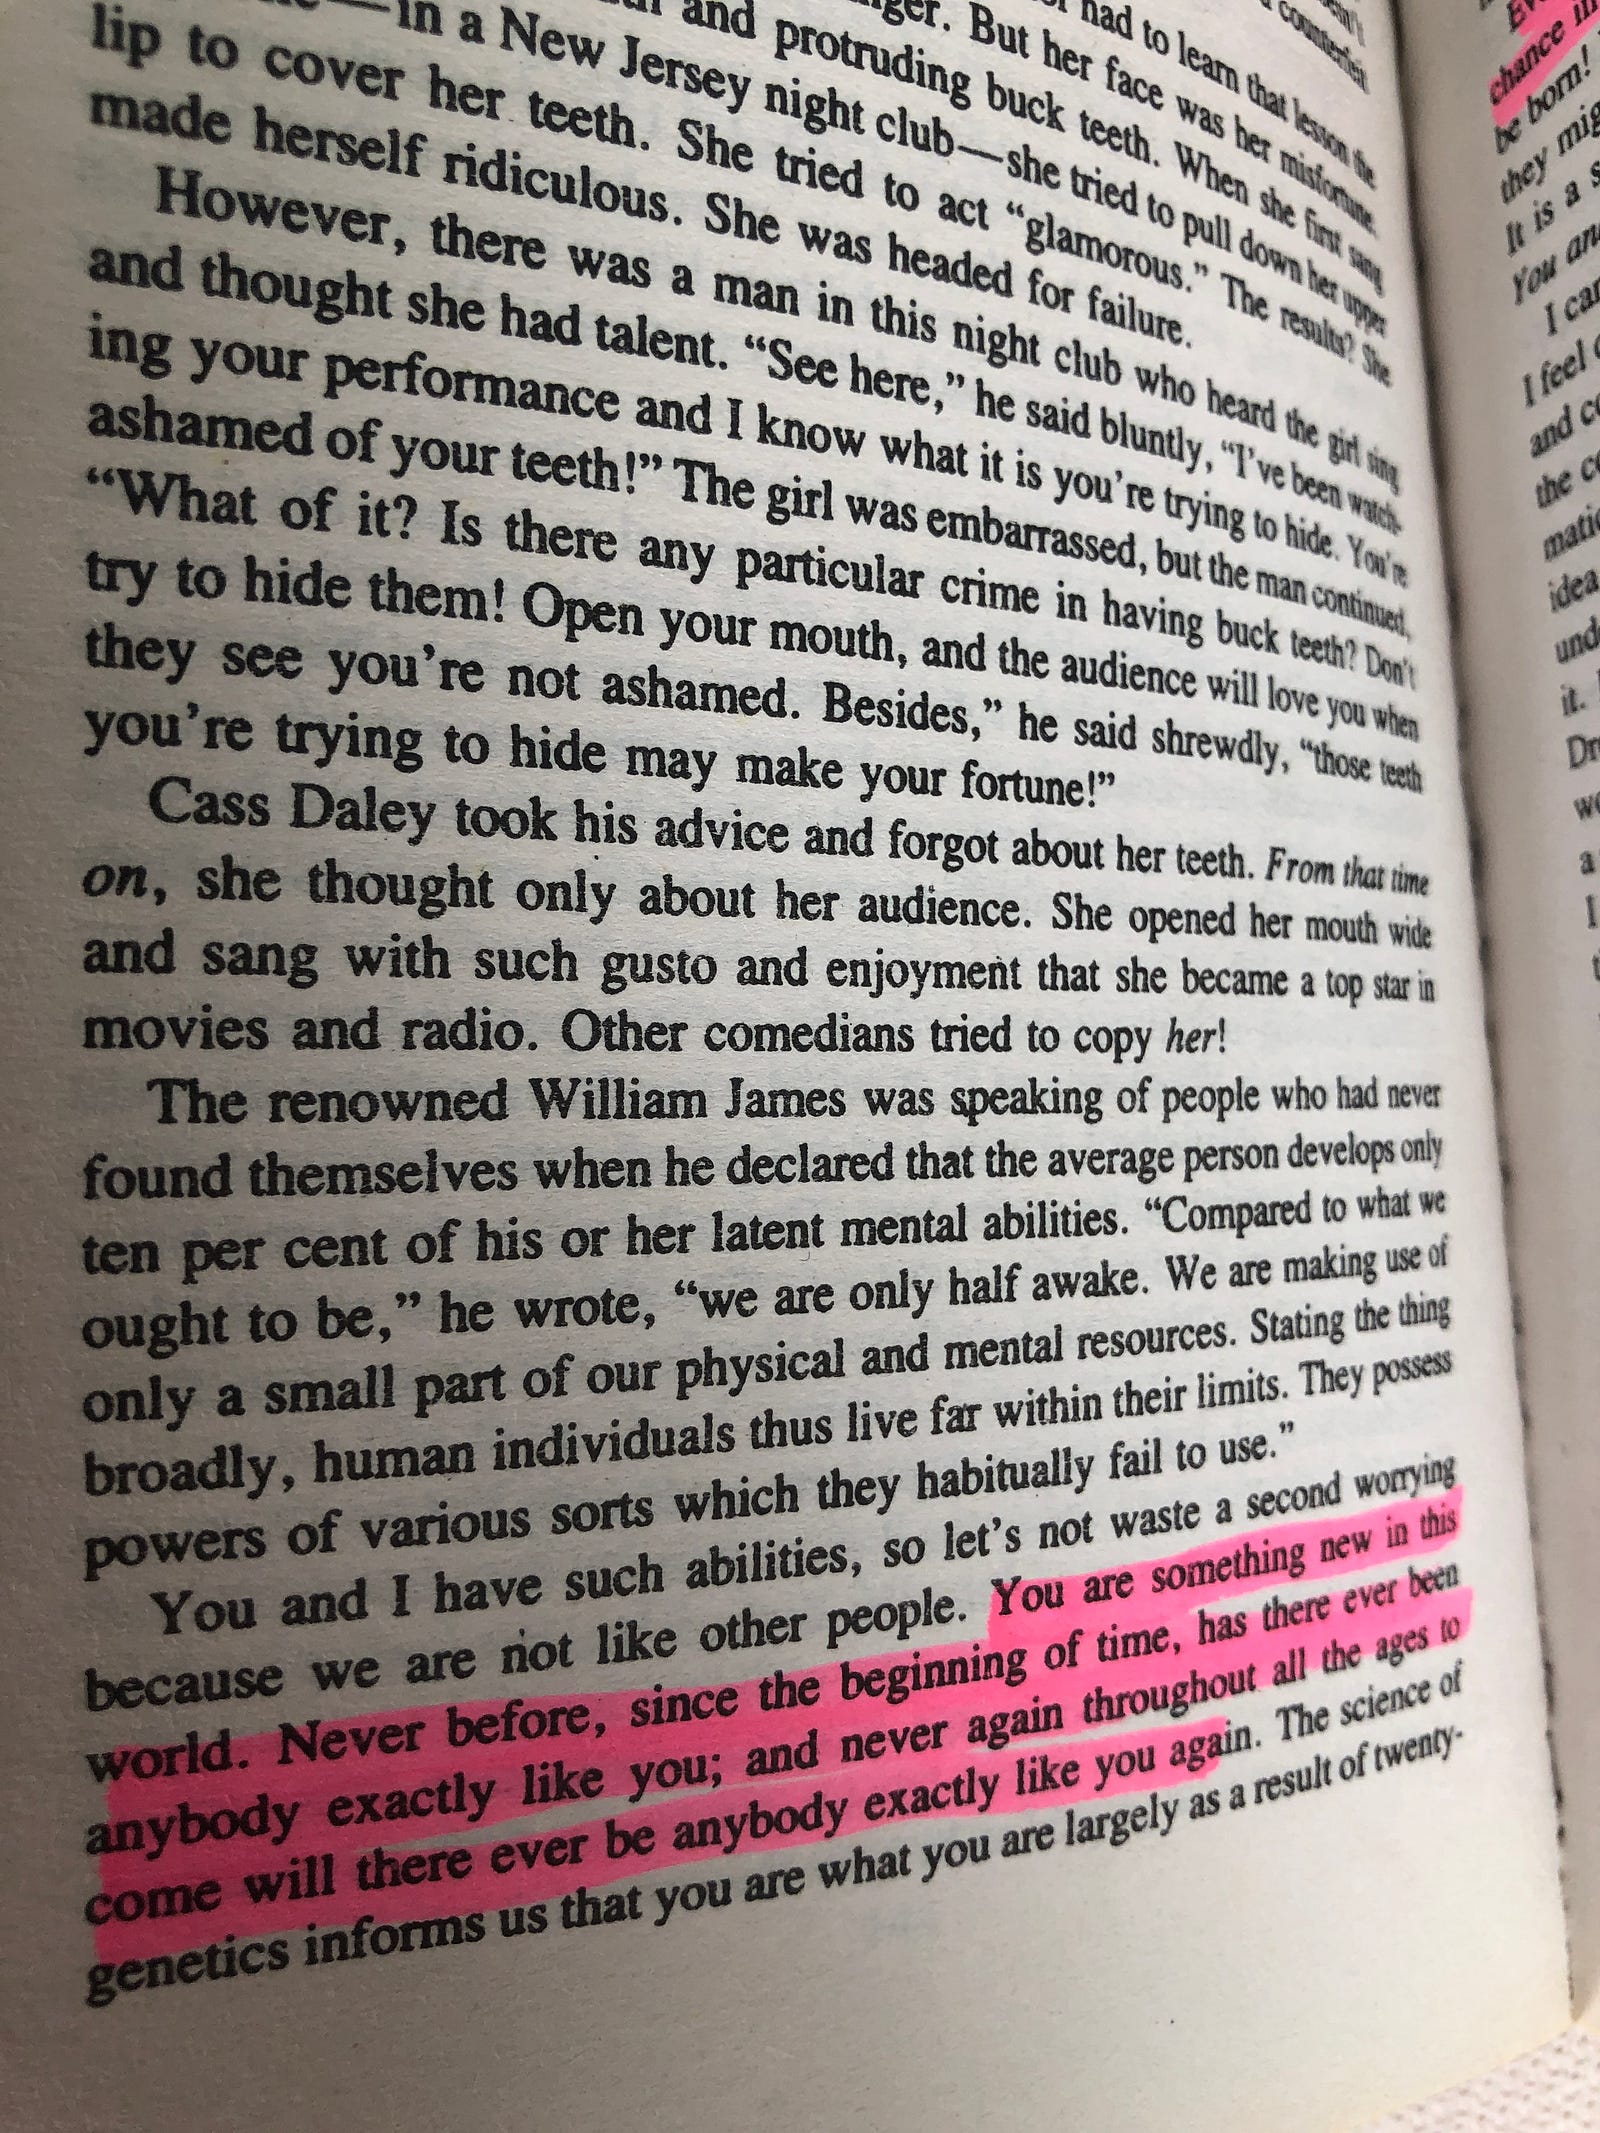 paper back copy of Dale Carnegie’s book with section highlighted in pink. Text reads ‘You are something new in this world.’ and extended quoted section.